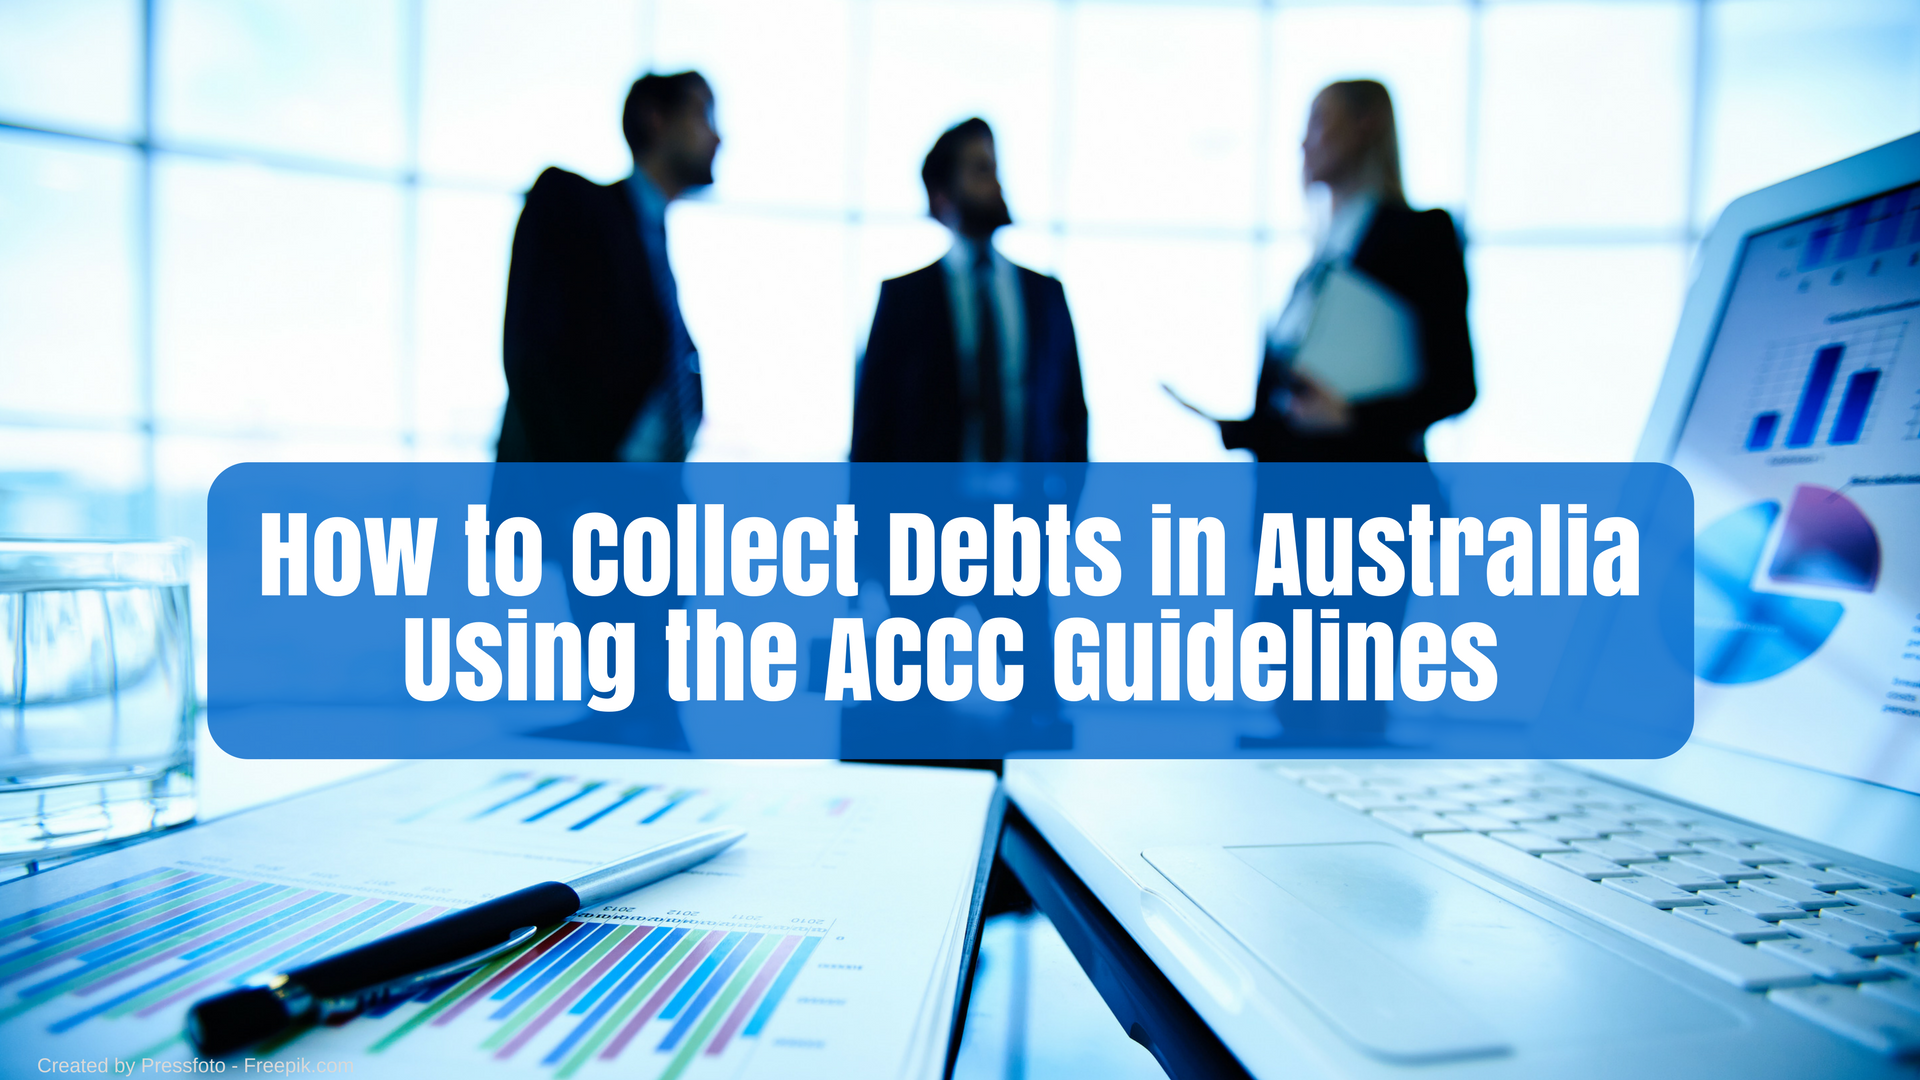 How to Collect Debts in Australia Using the ACCC Guidelines